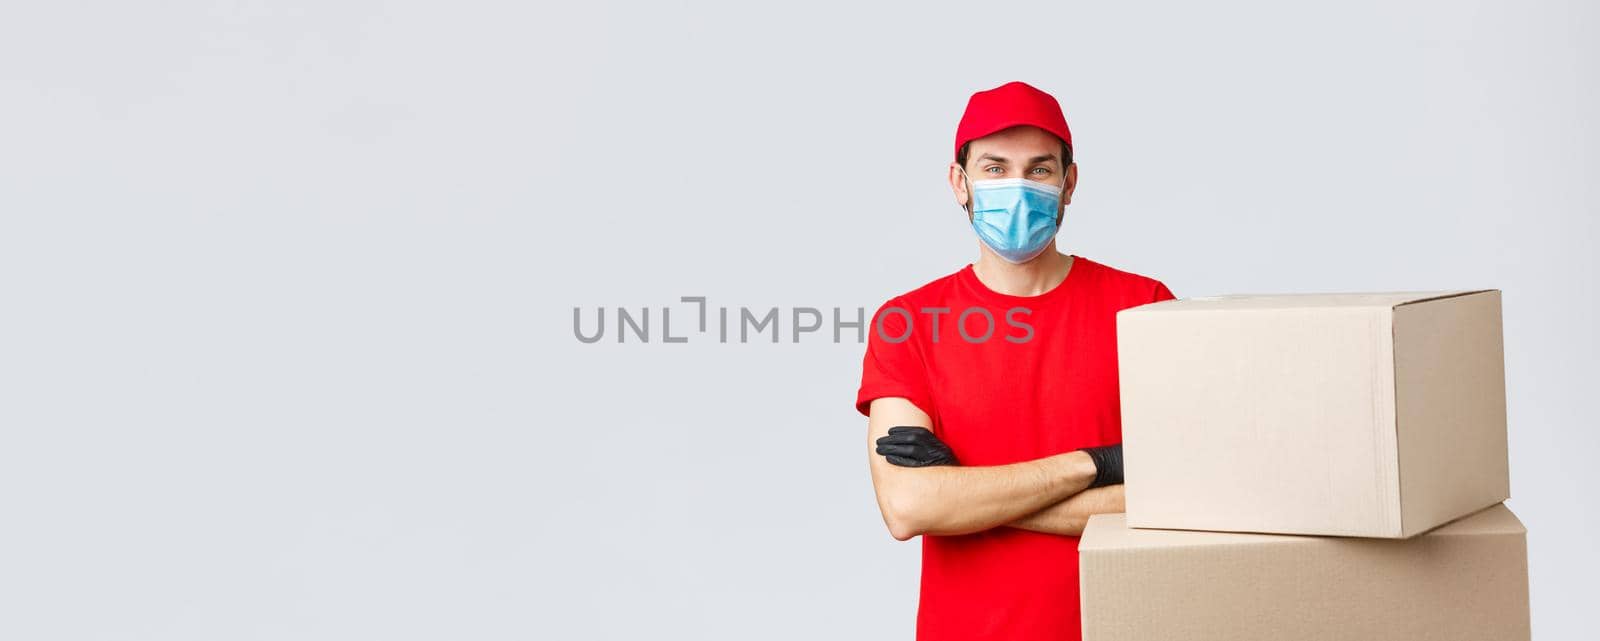 Packages and parcels delivery, covid-19 quarantine and transfer orders. Confident young courier in red uniform, gloves and medical mask, cross arms as standing boxes, grey background.